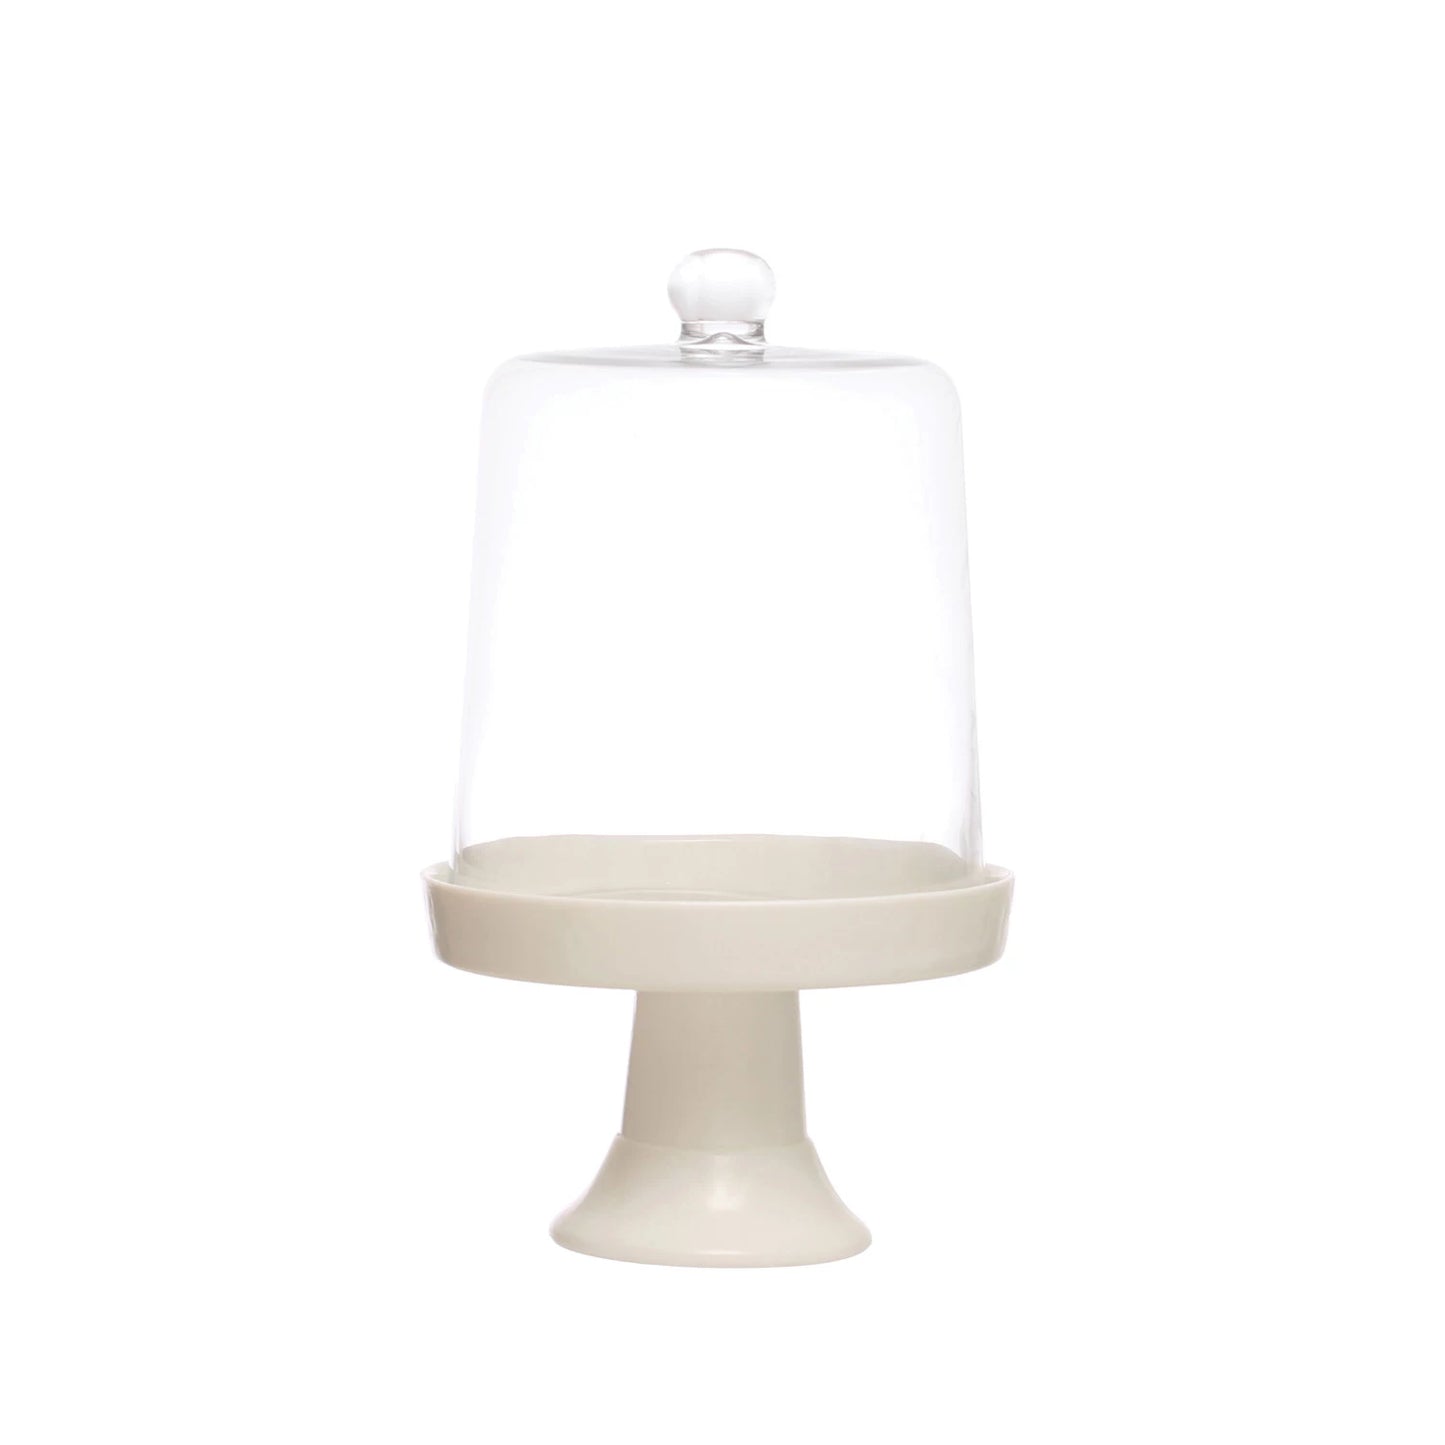 white pedestal with glass cloche displayed against a white background